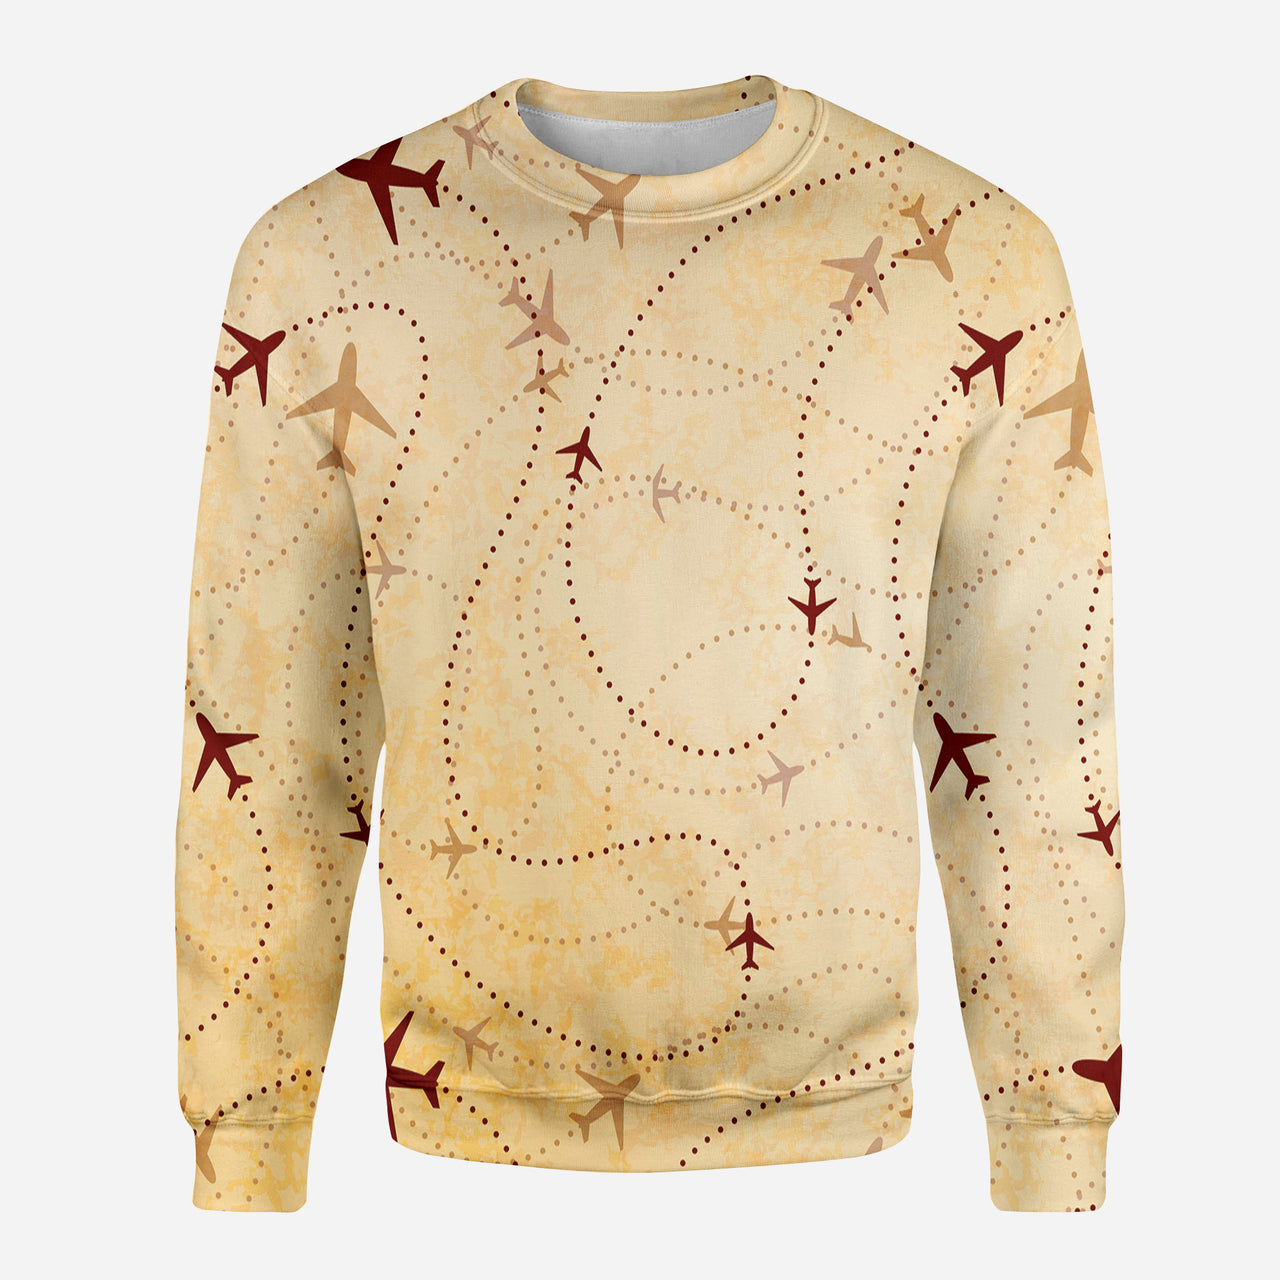 Vintage Travelling with Aircraft Designed 3D Sweatshirts